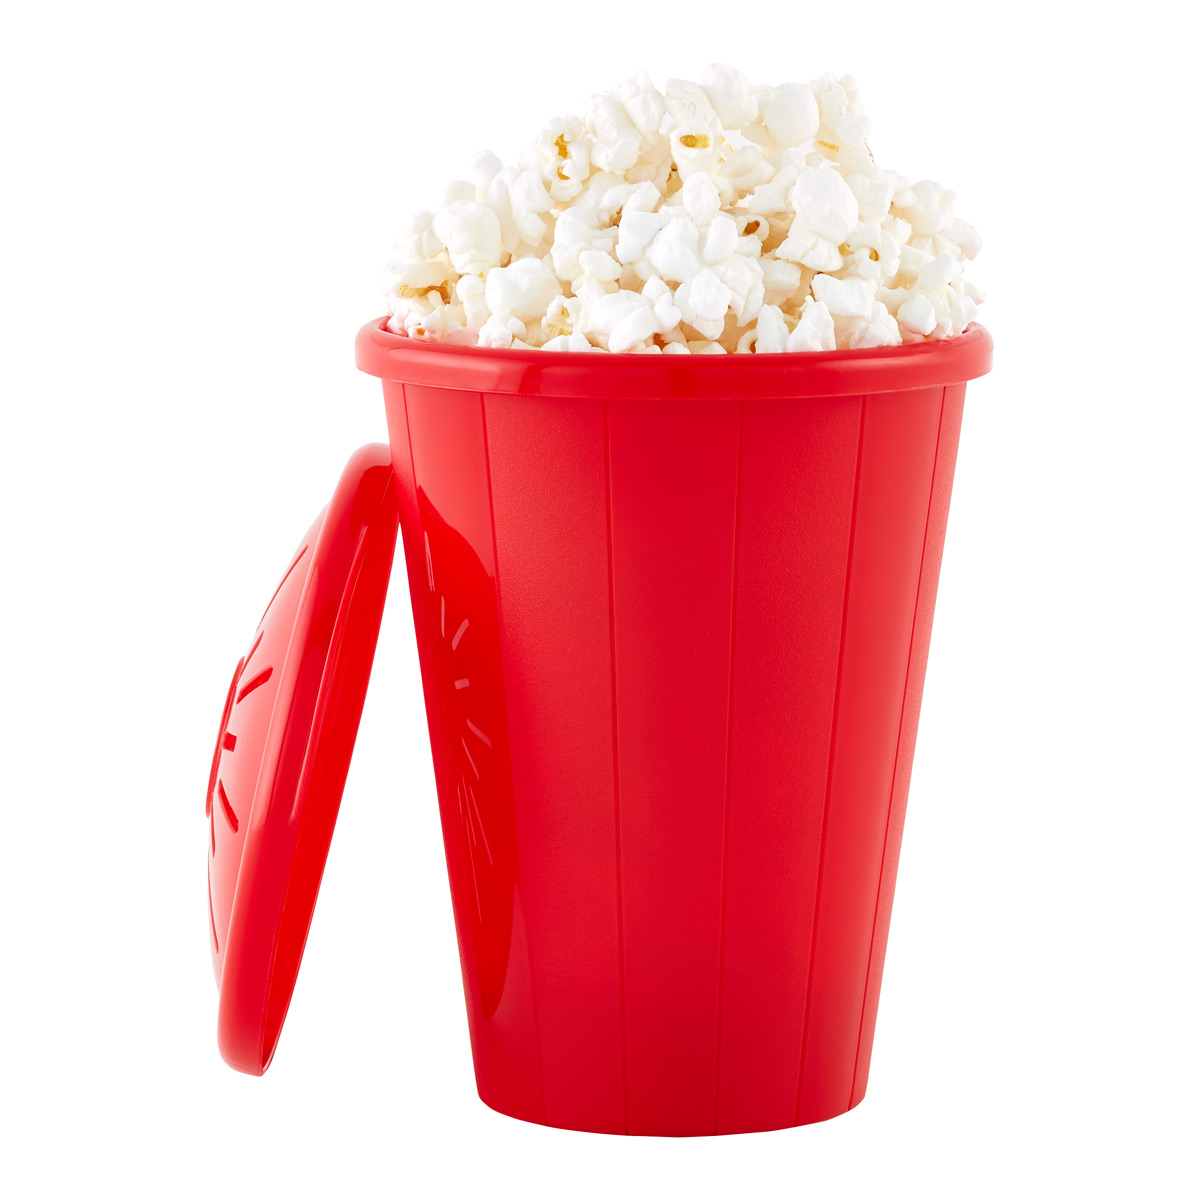 Popcorn | The Container Store